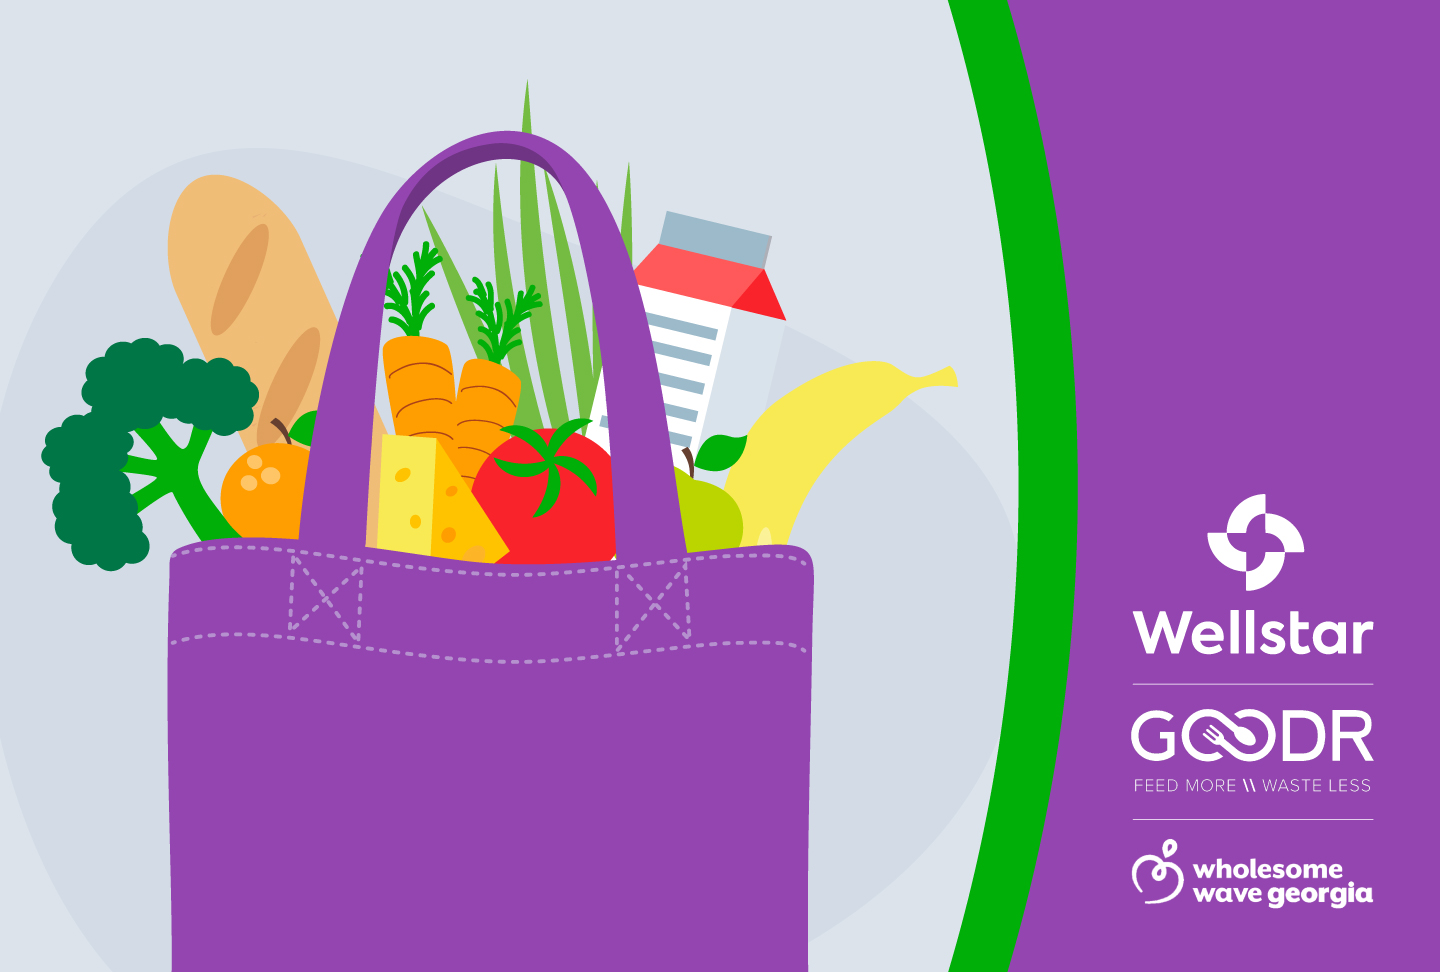 Illustration of bag of groceries. Wellstar, Goodr and Wholesome Wave Georgia logos